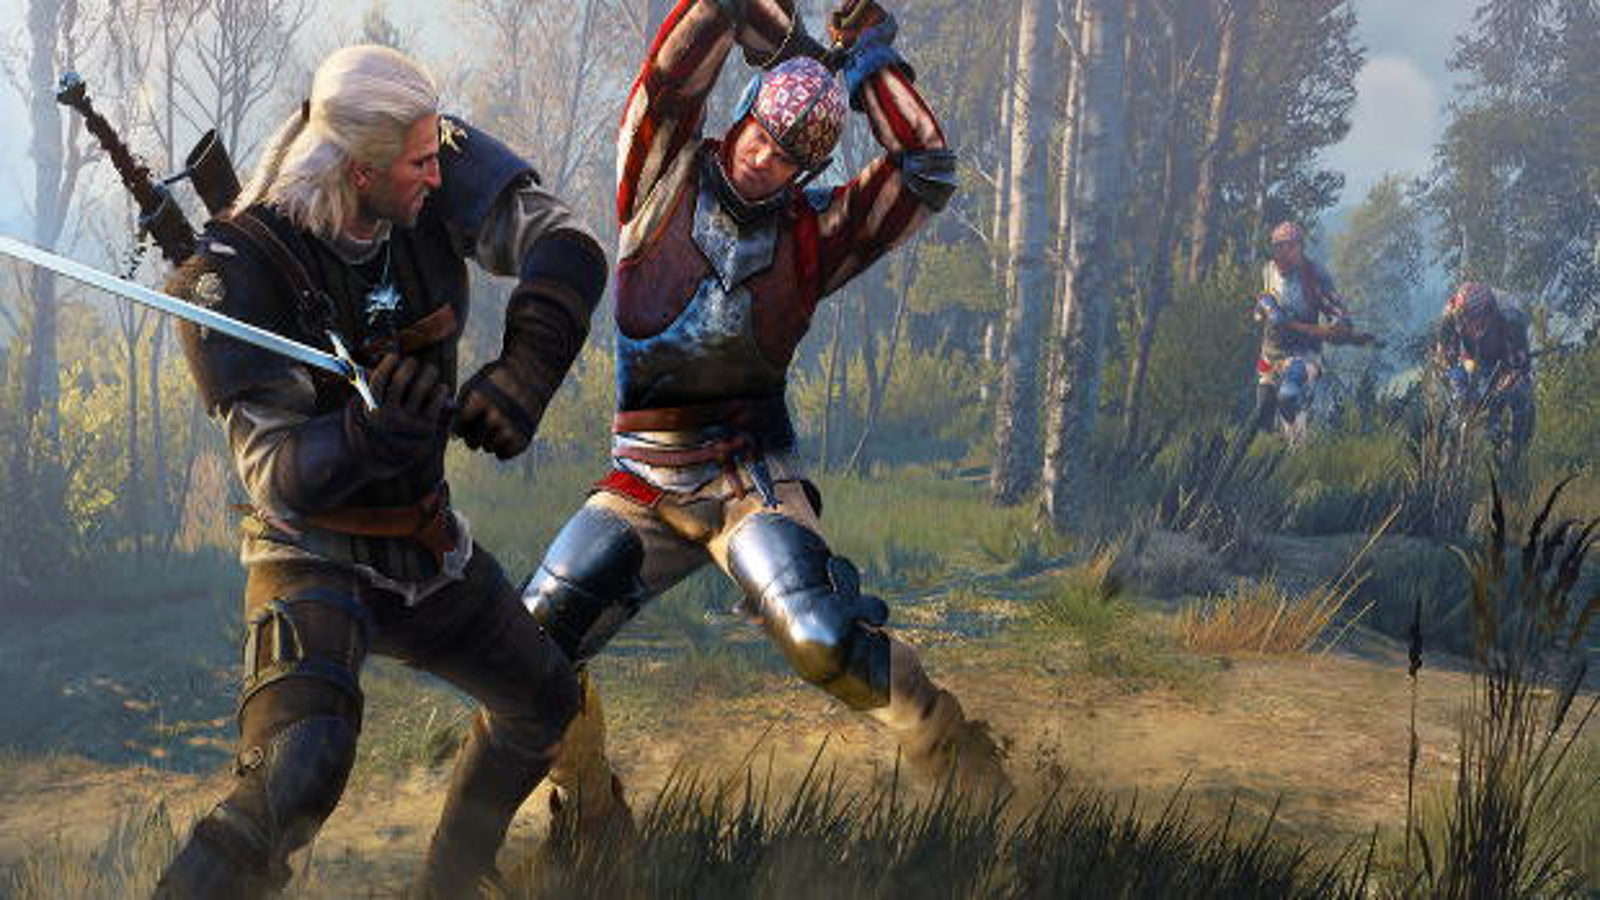 Top 10 hidden places in The Witcher 3 – The Witcher 3 Guide